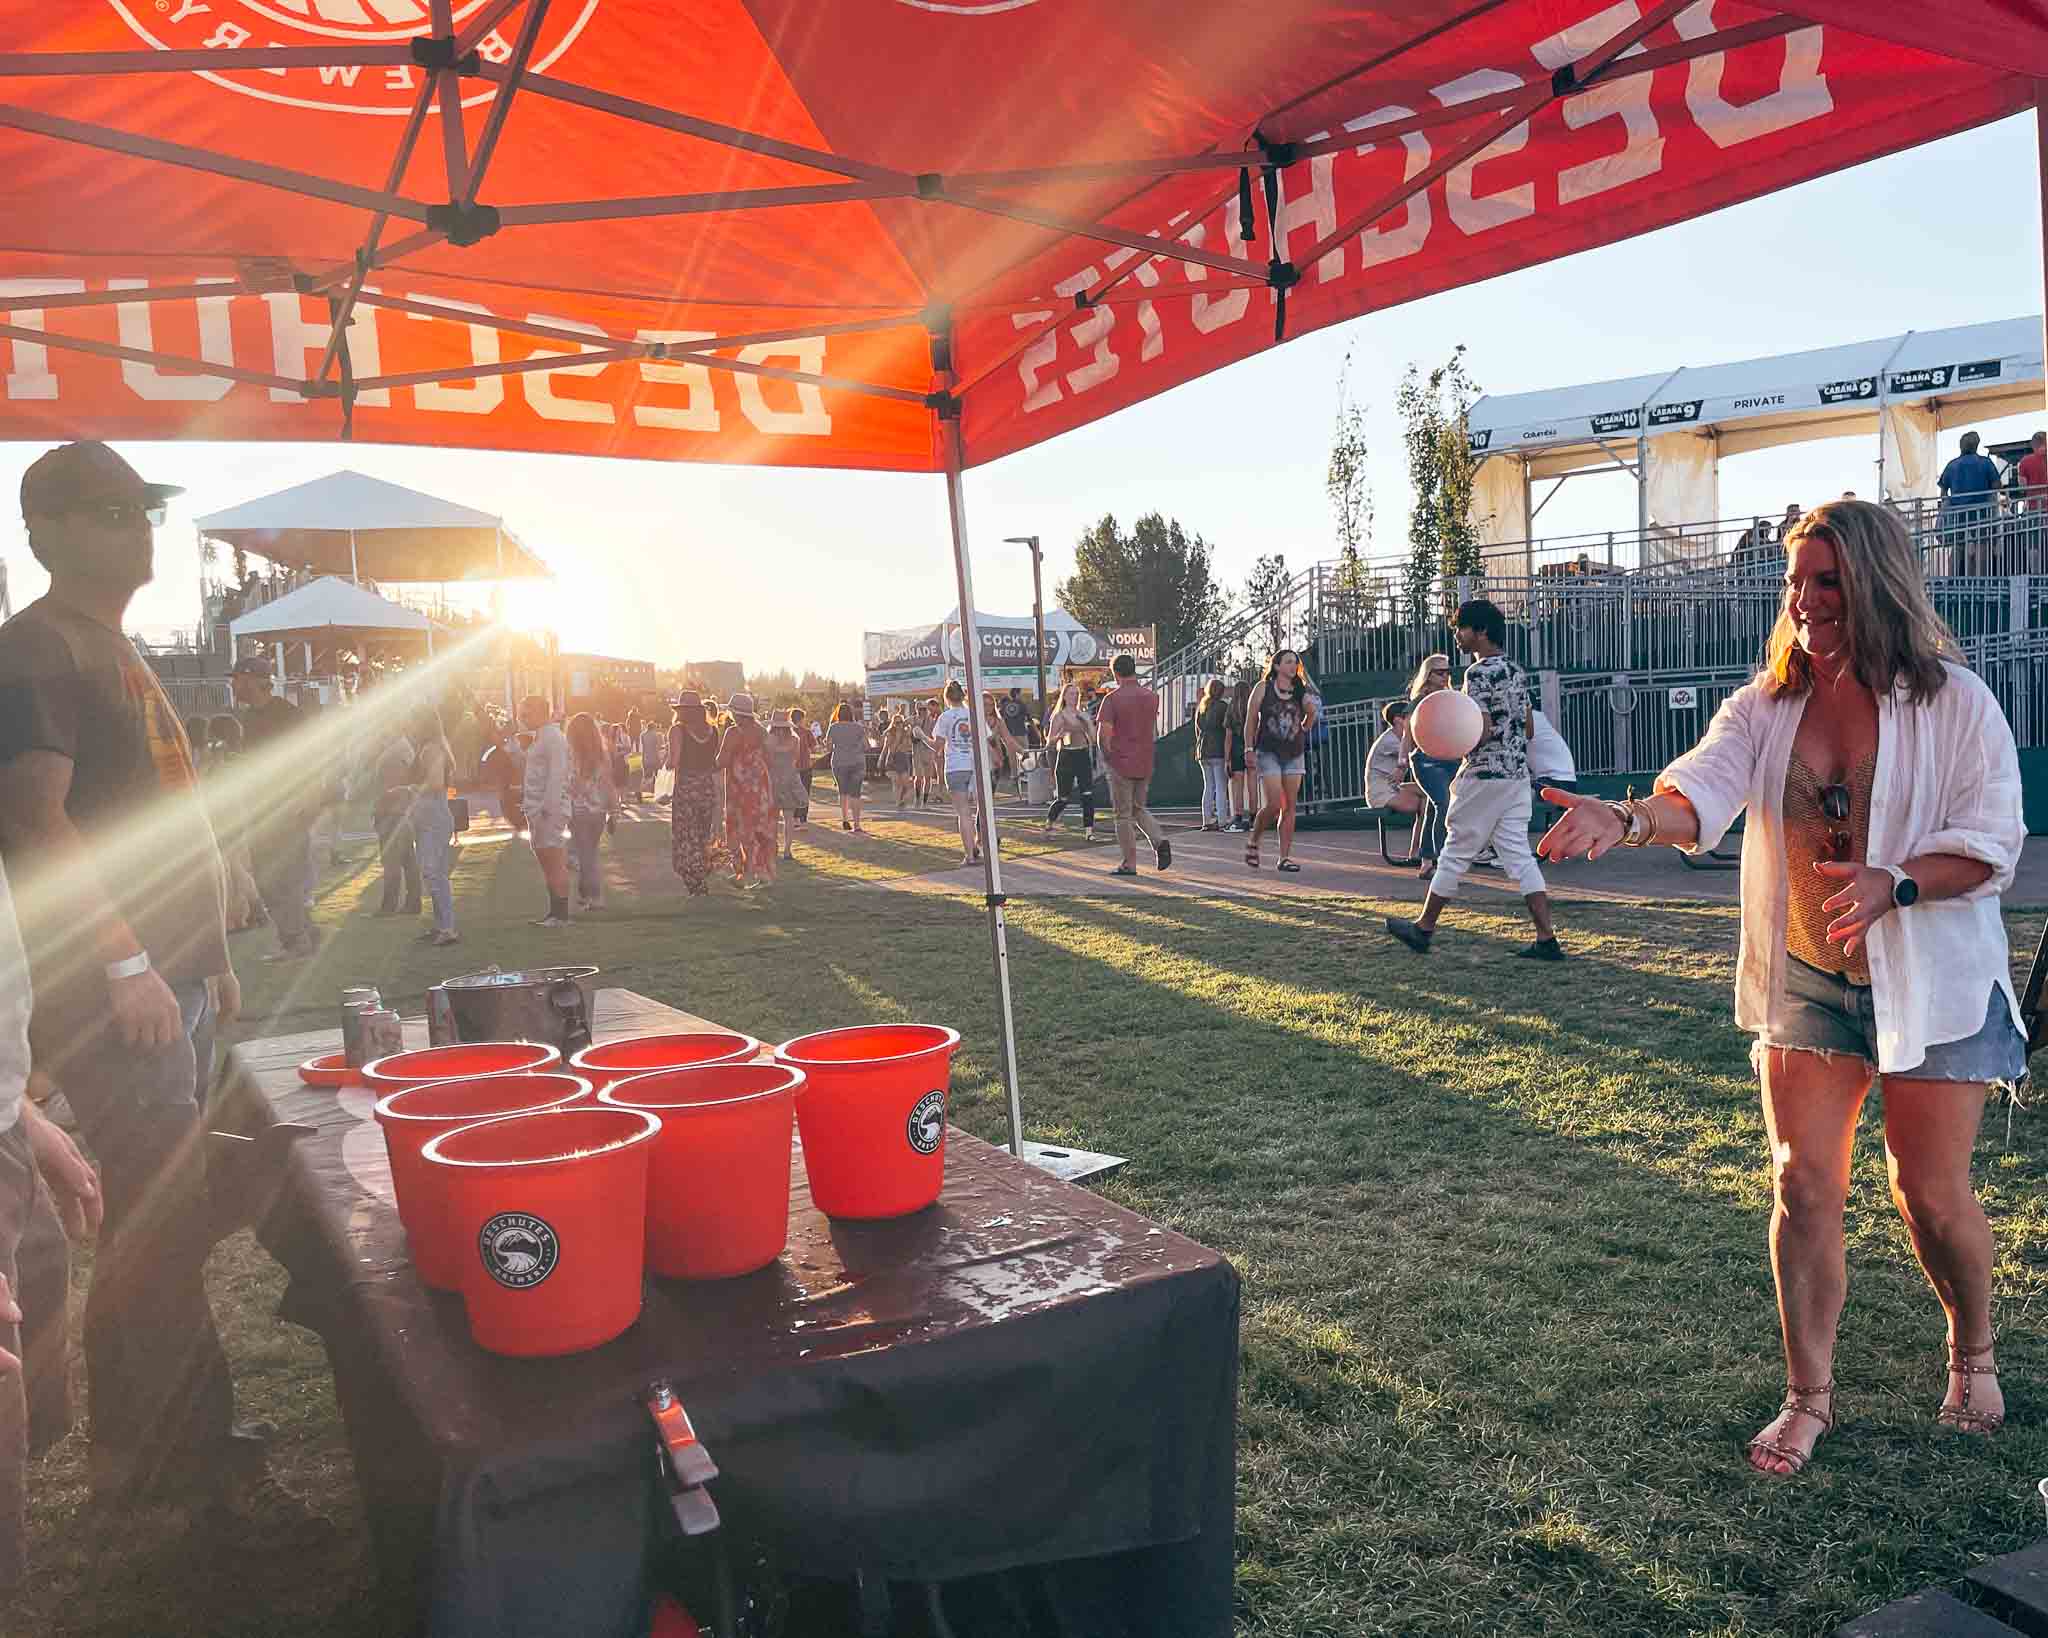 Woman tosses a ball into a bucket of water at the Bend concerts in Oregon